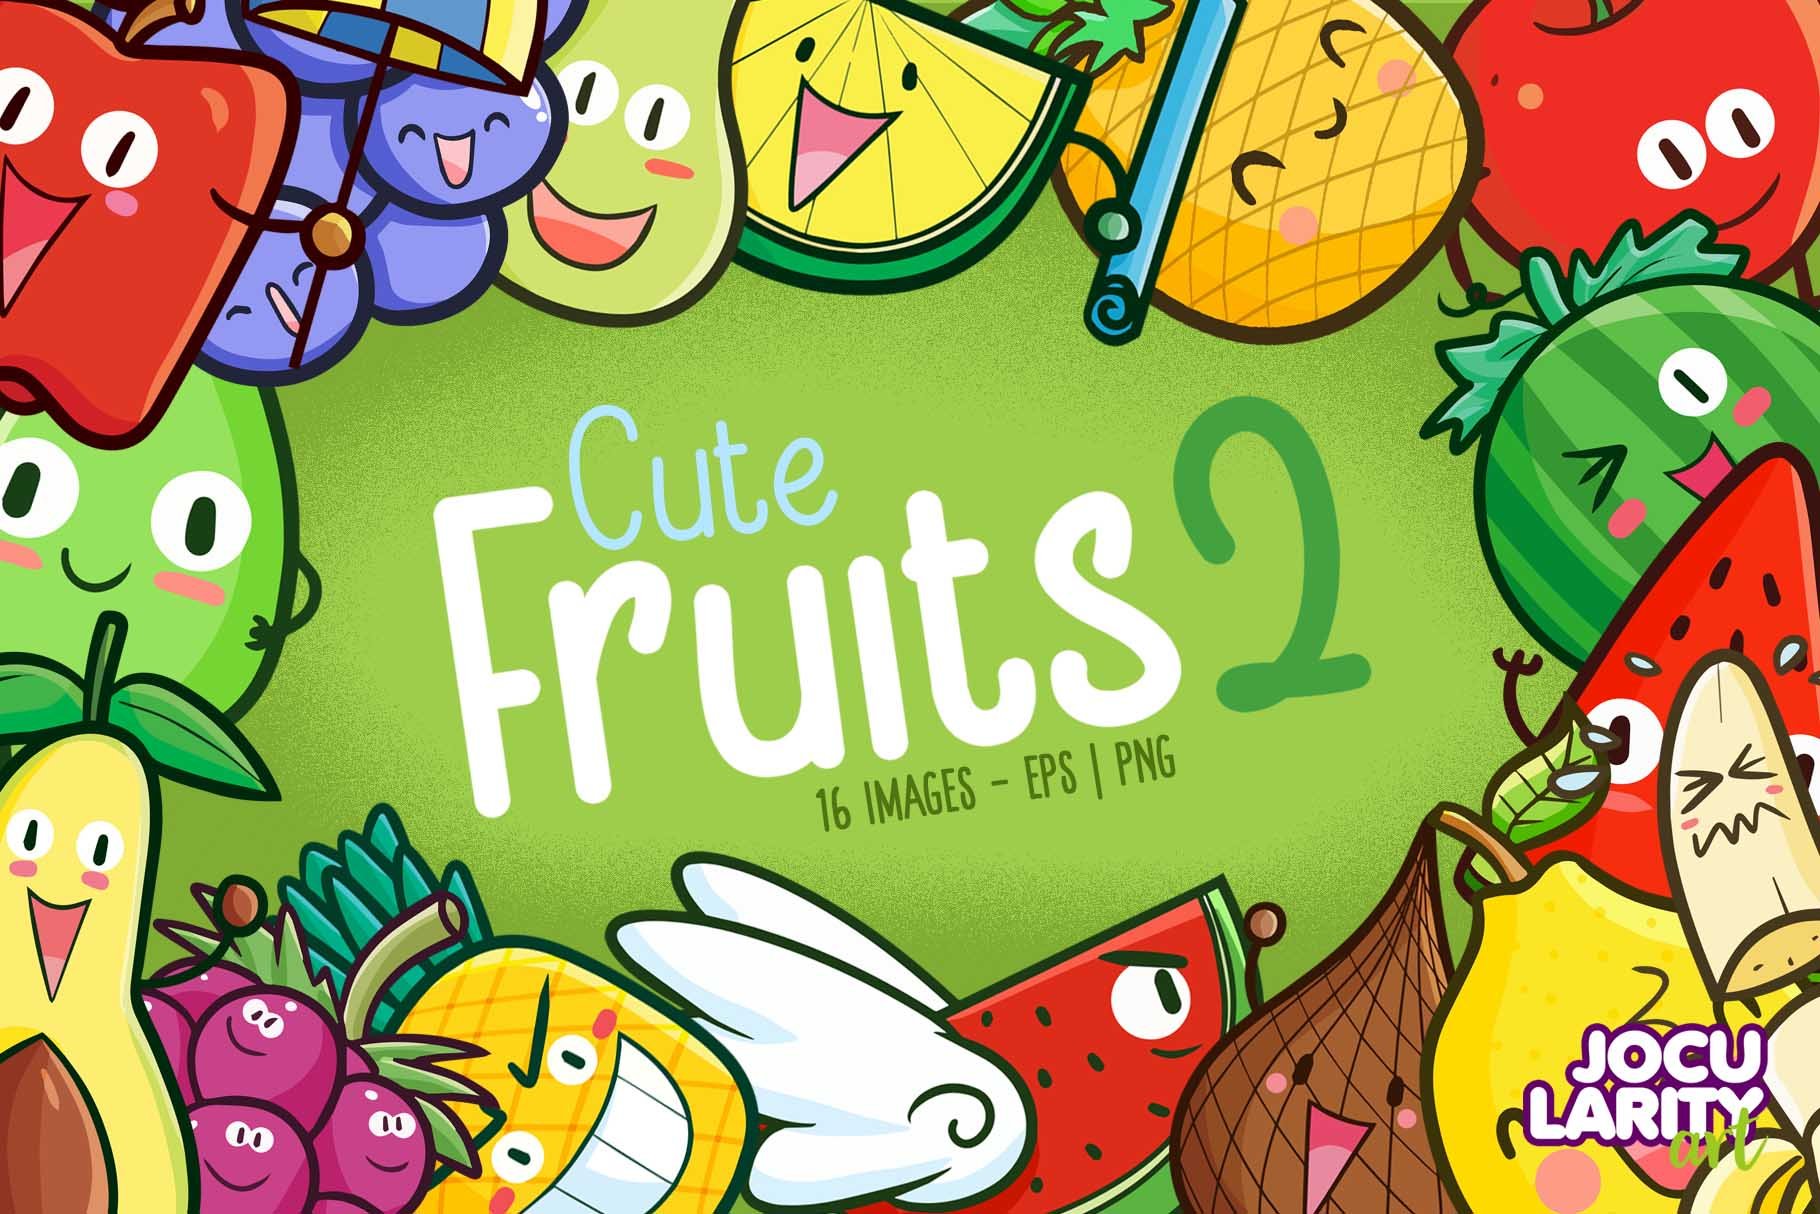 Cute Fruits Cartoon Characters #2 cover image.